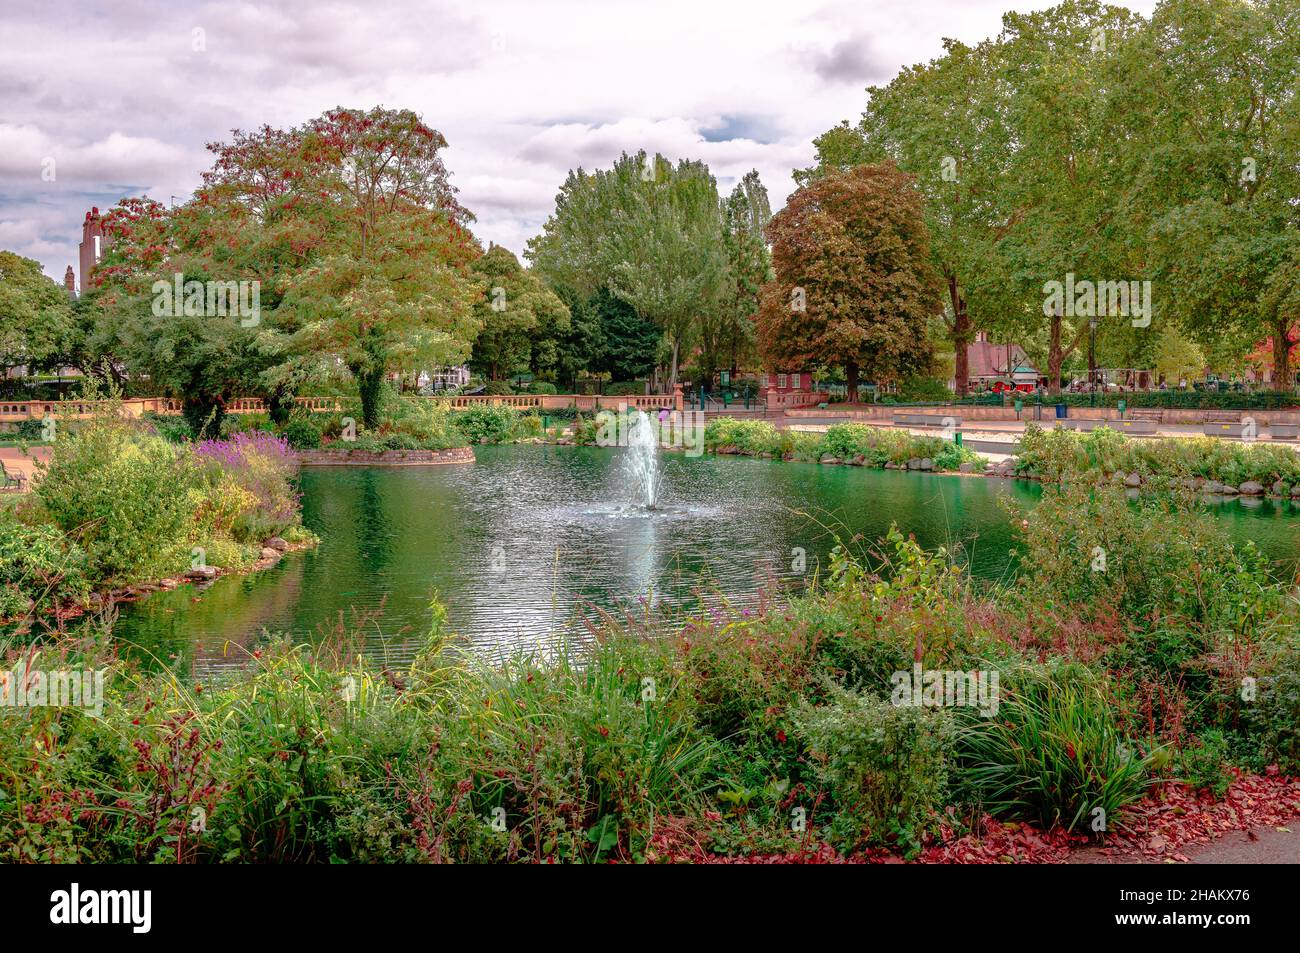 The ornamental lake in Bishops Park, in the south of Hammersmith & Fulham next to the river Thames, London, UK. Stock Photo